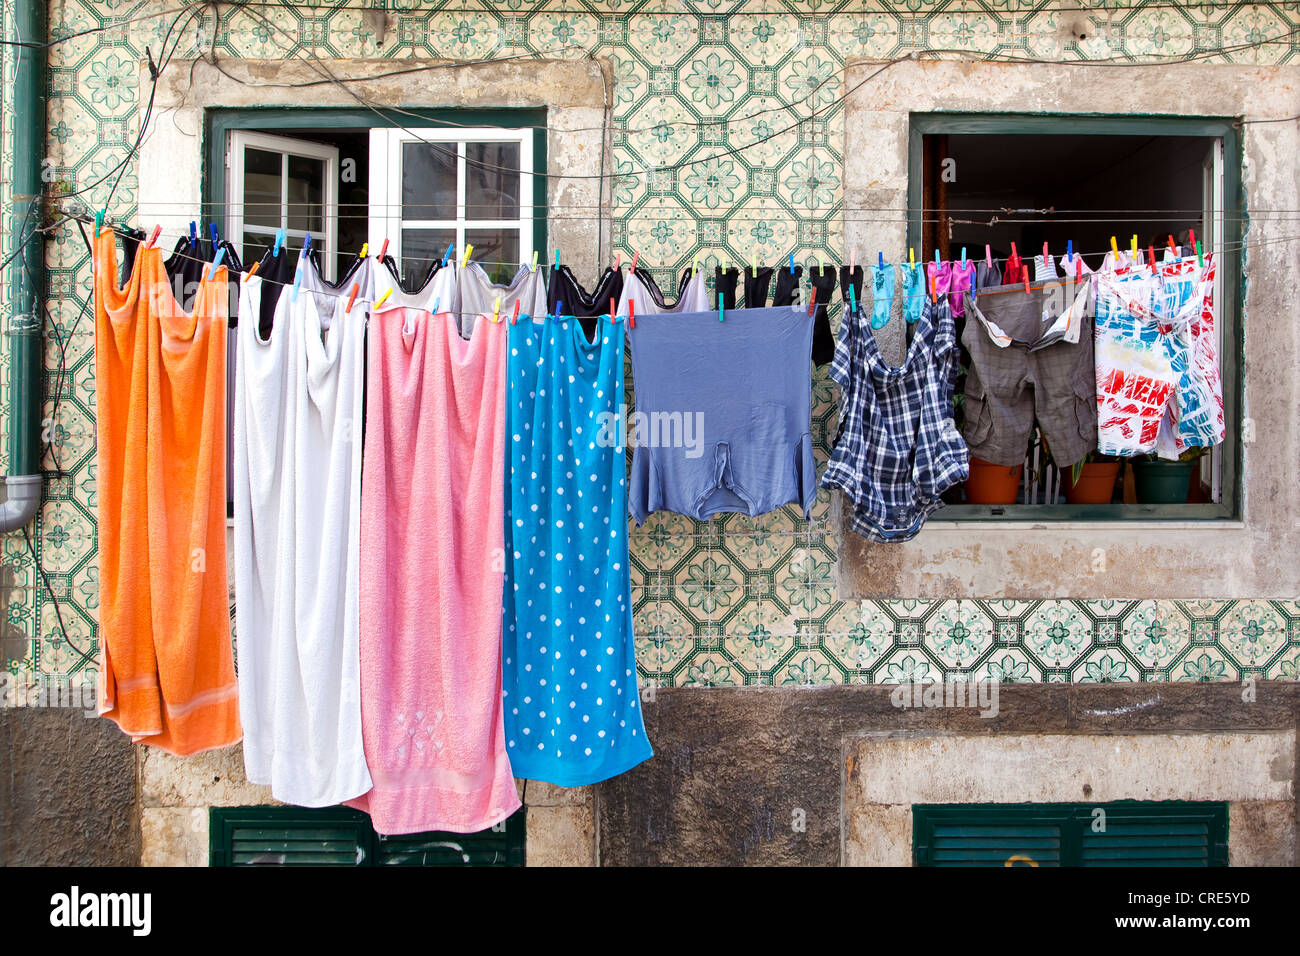 Laundry hanging to dry outside a house facade with tiles in the district of  Bairro Alto, Lisbon, Portugal, Europe Stock Photo - Alamy